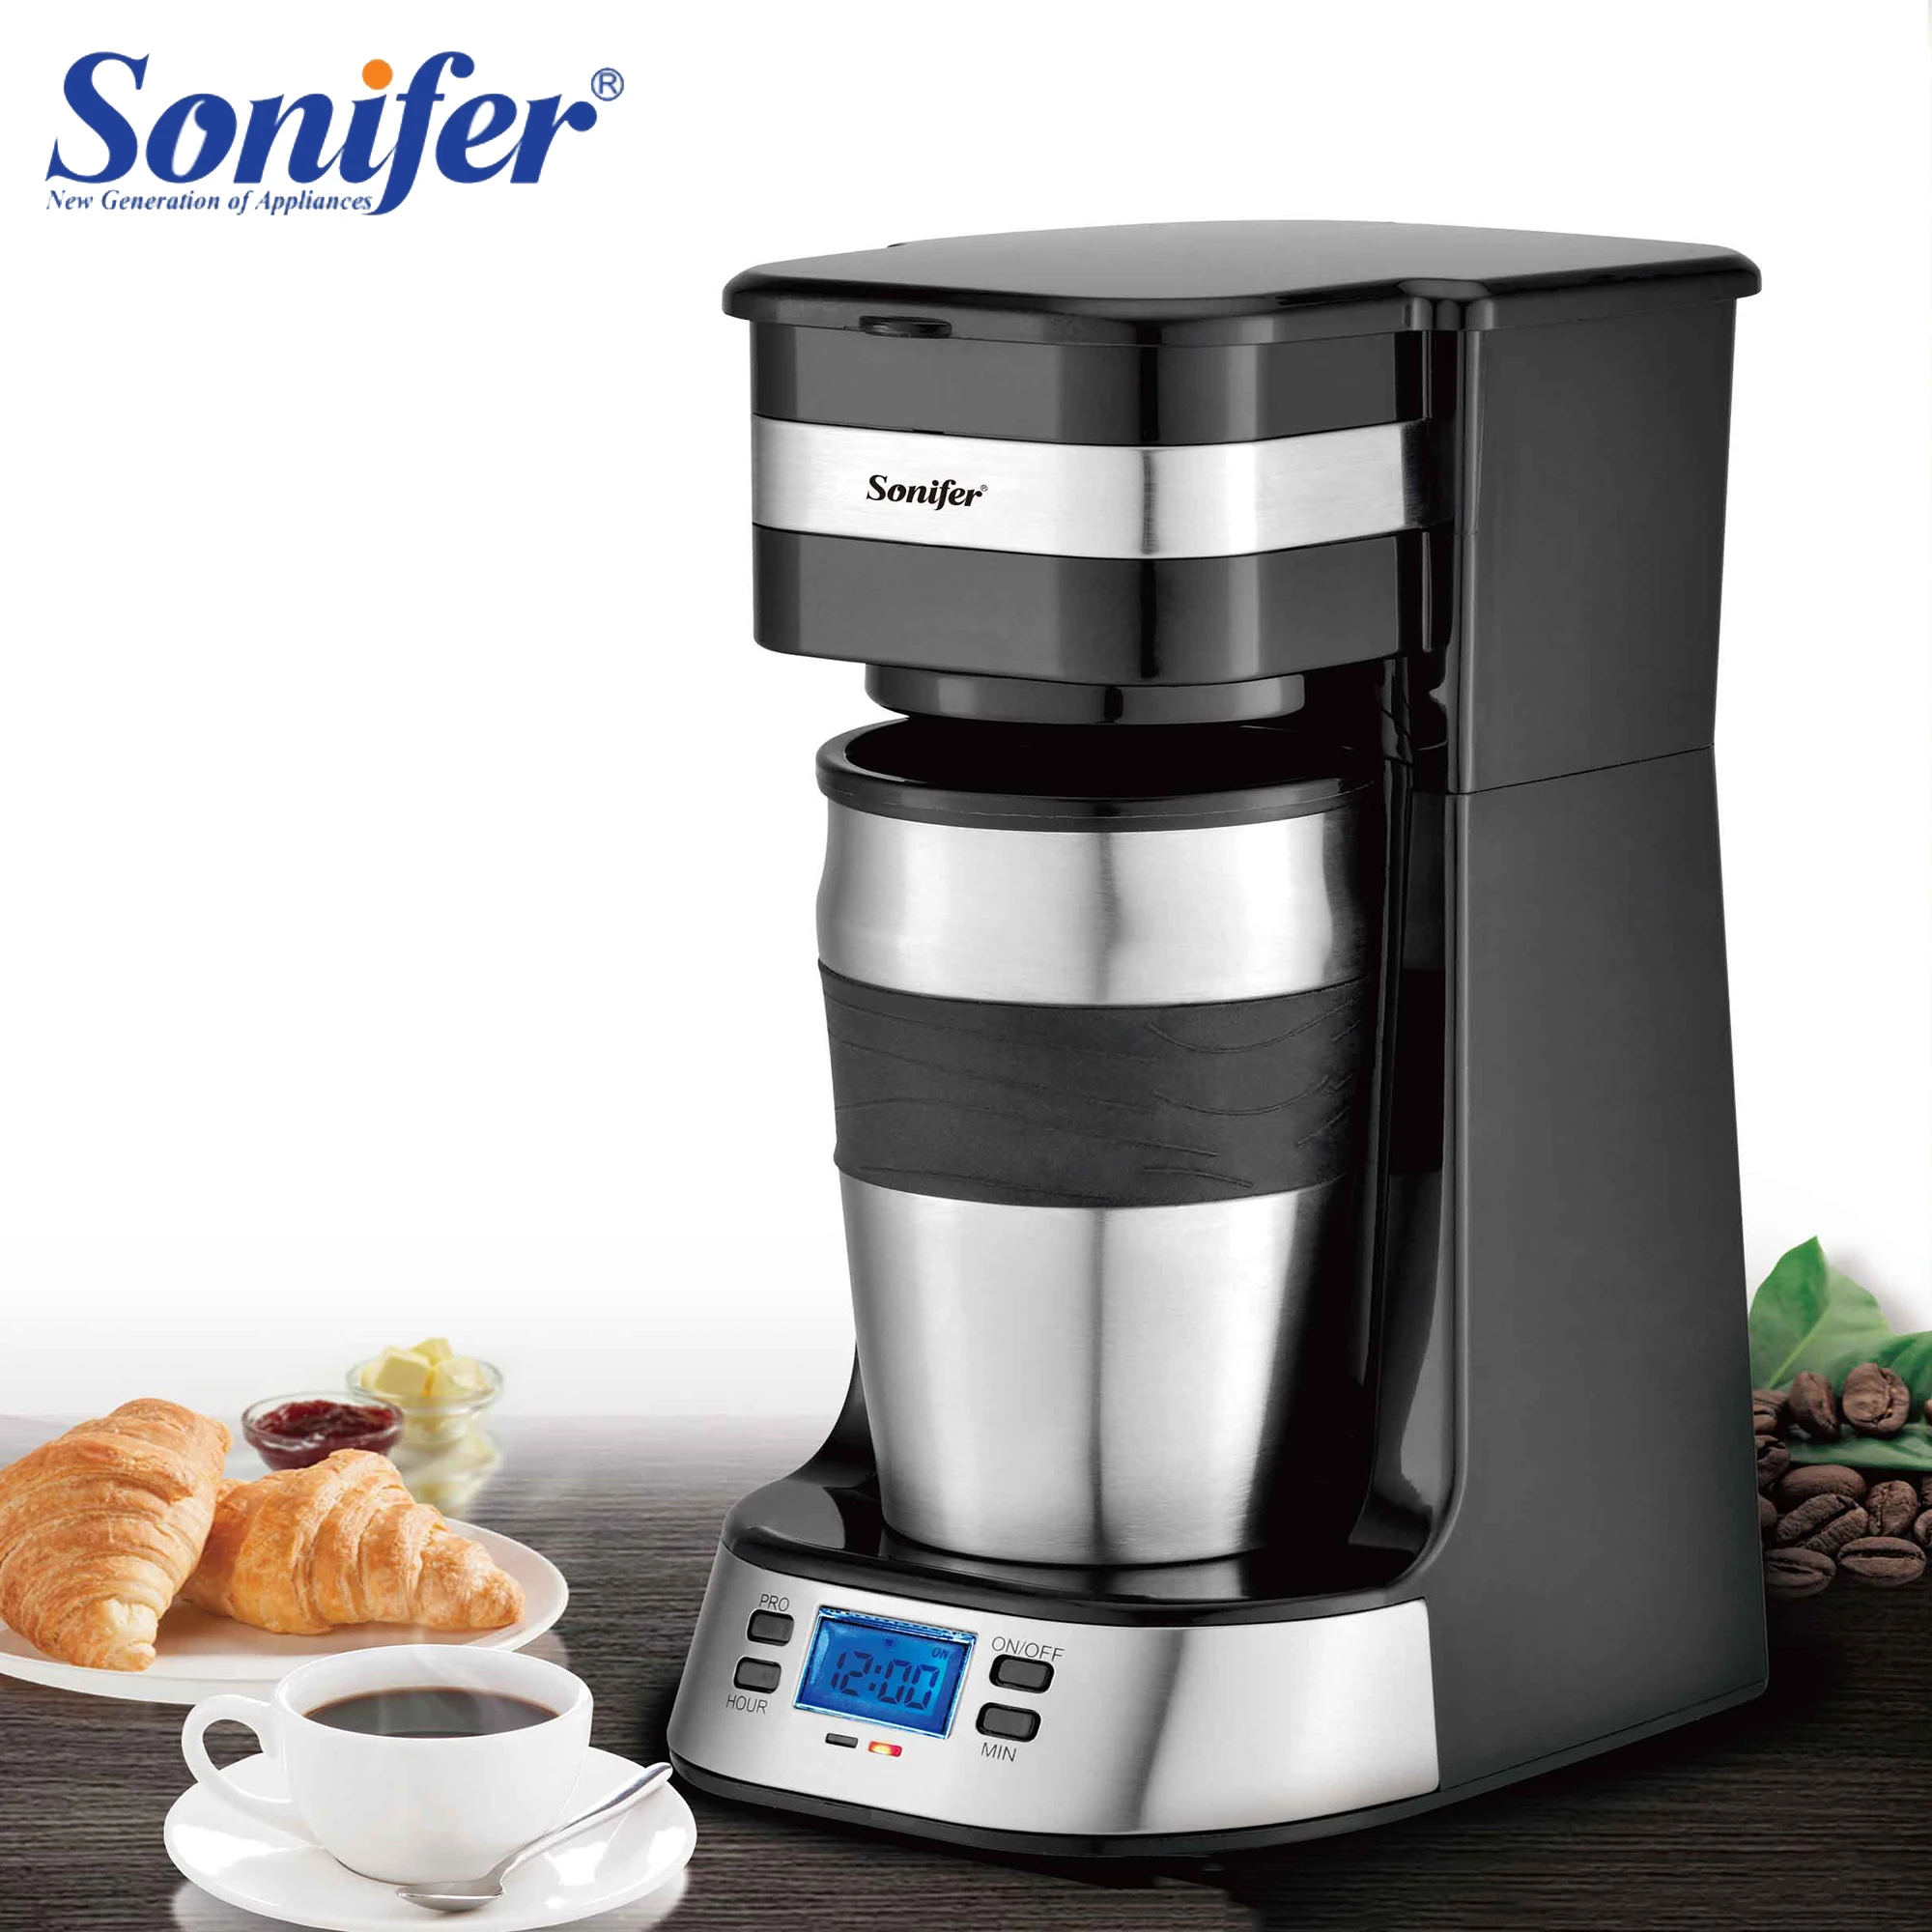 https://ae01.alicdn.com/kf/Seef1b60a4e804b8284f8c41b8a313b68c/Drip-Coffee-Maker-0-42L-With-Filter-LCD-and-Timer-Display-Household-750W-Coffee-Machine-With.jpg